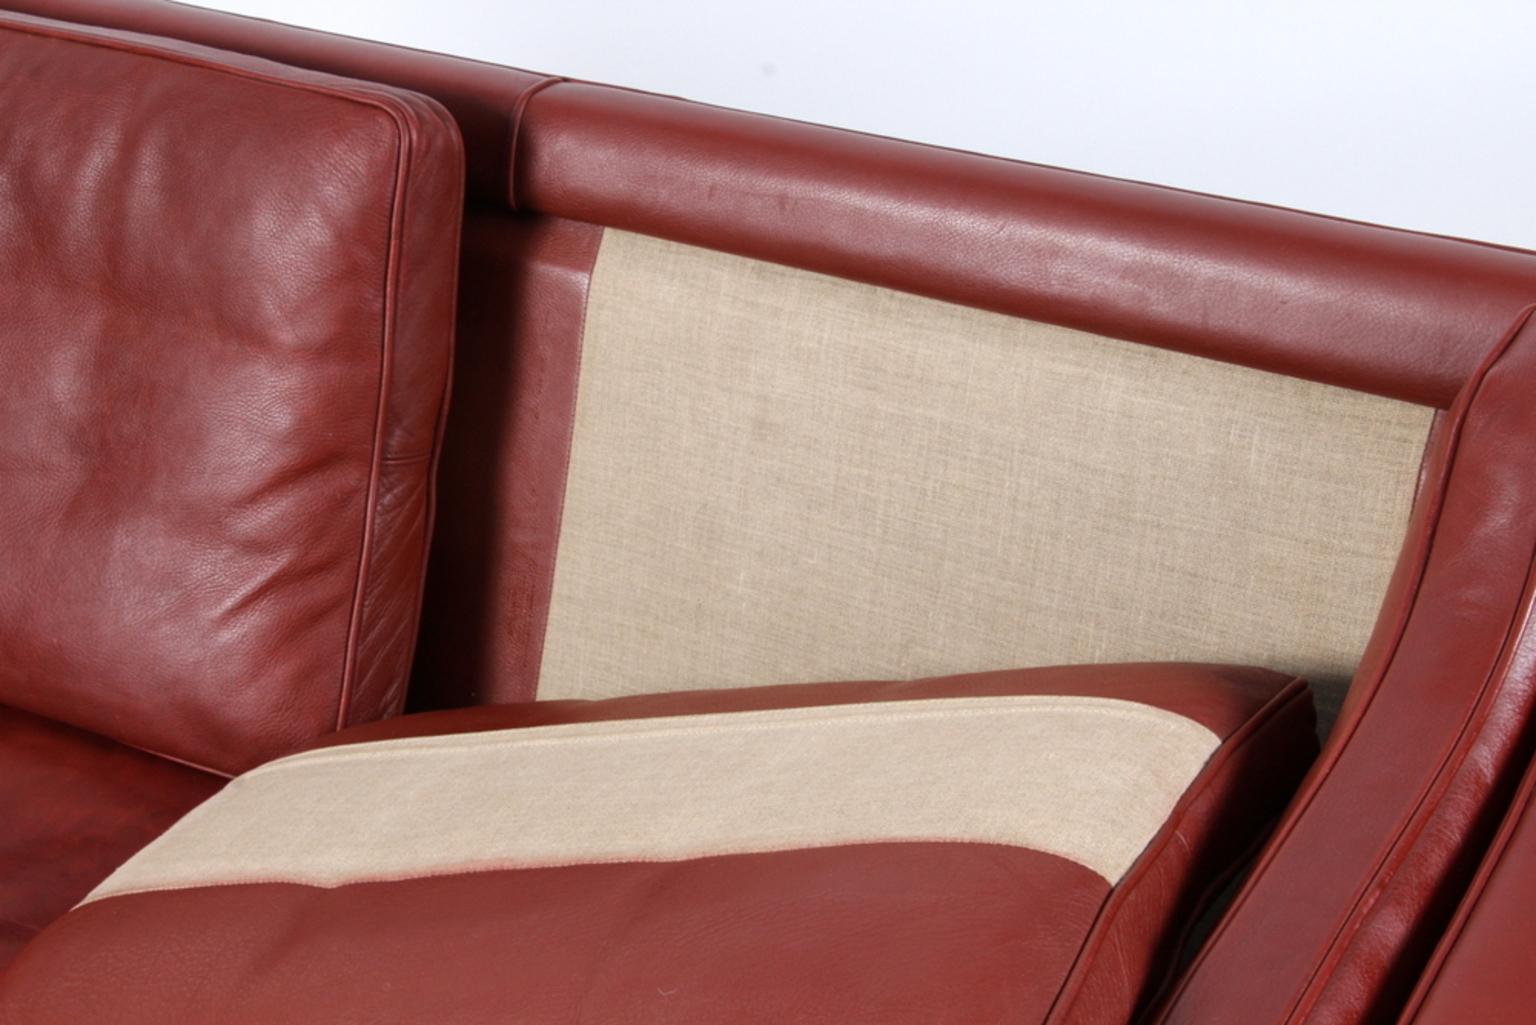 Mahogany Børge Mogensen Two-Seat Sofa, Model 2212, Original Indian Red Leather